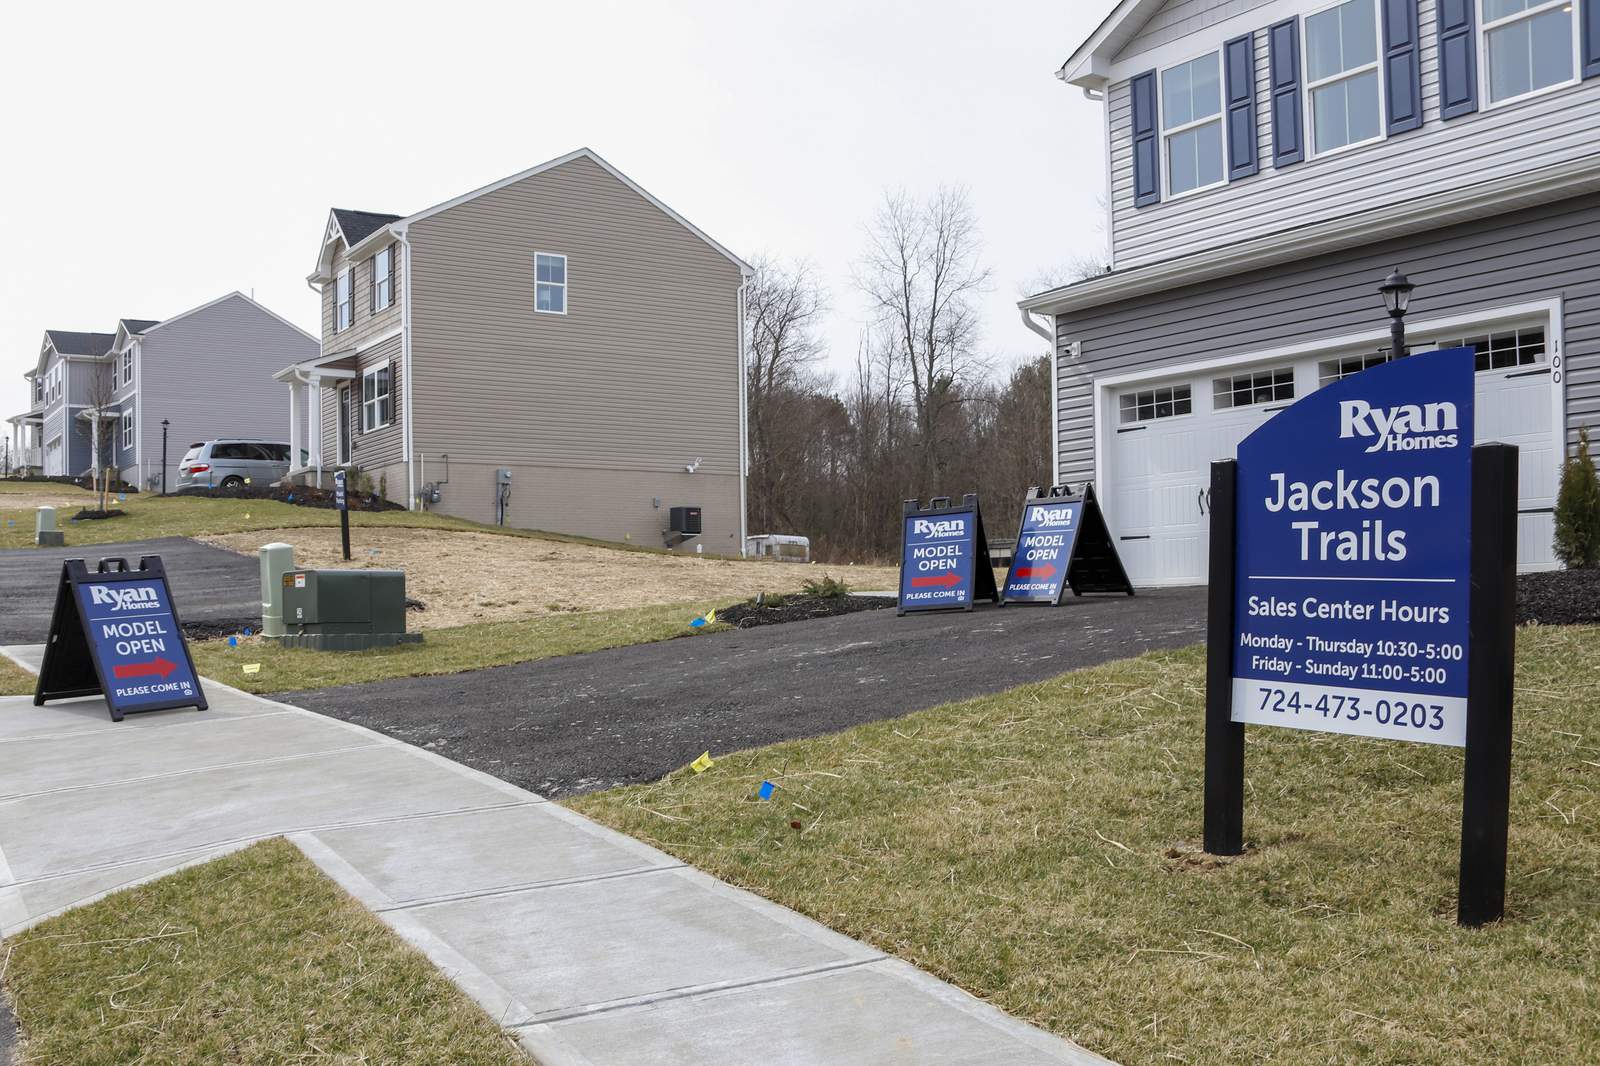 New home sales rise in December after sharp November drop